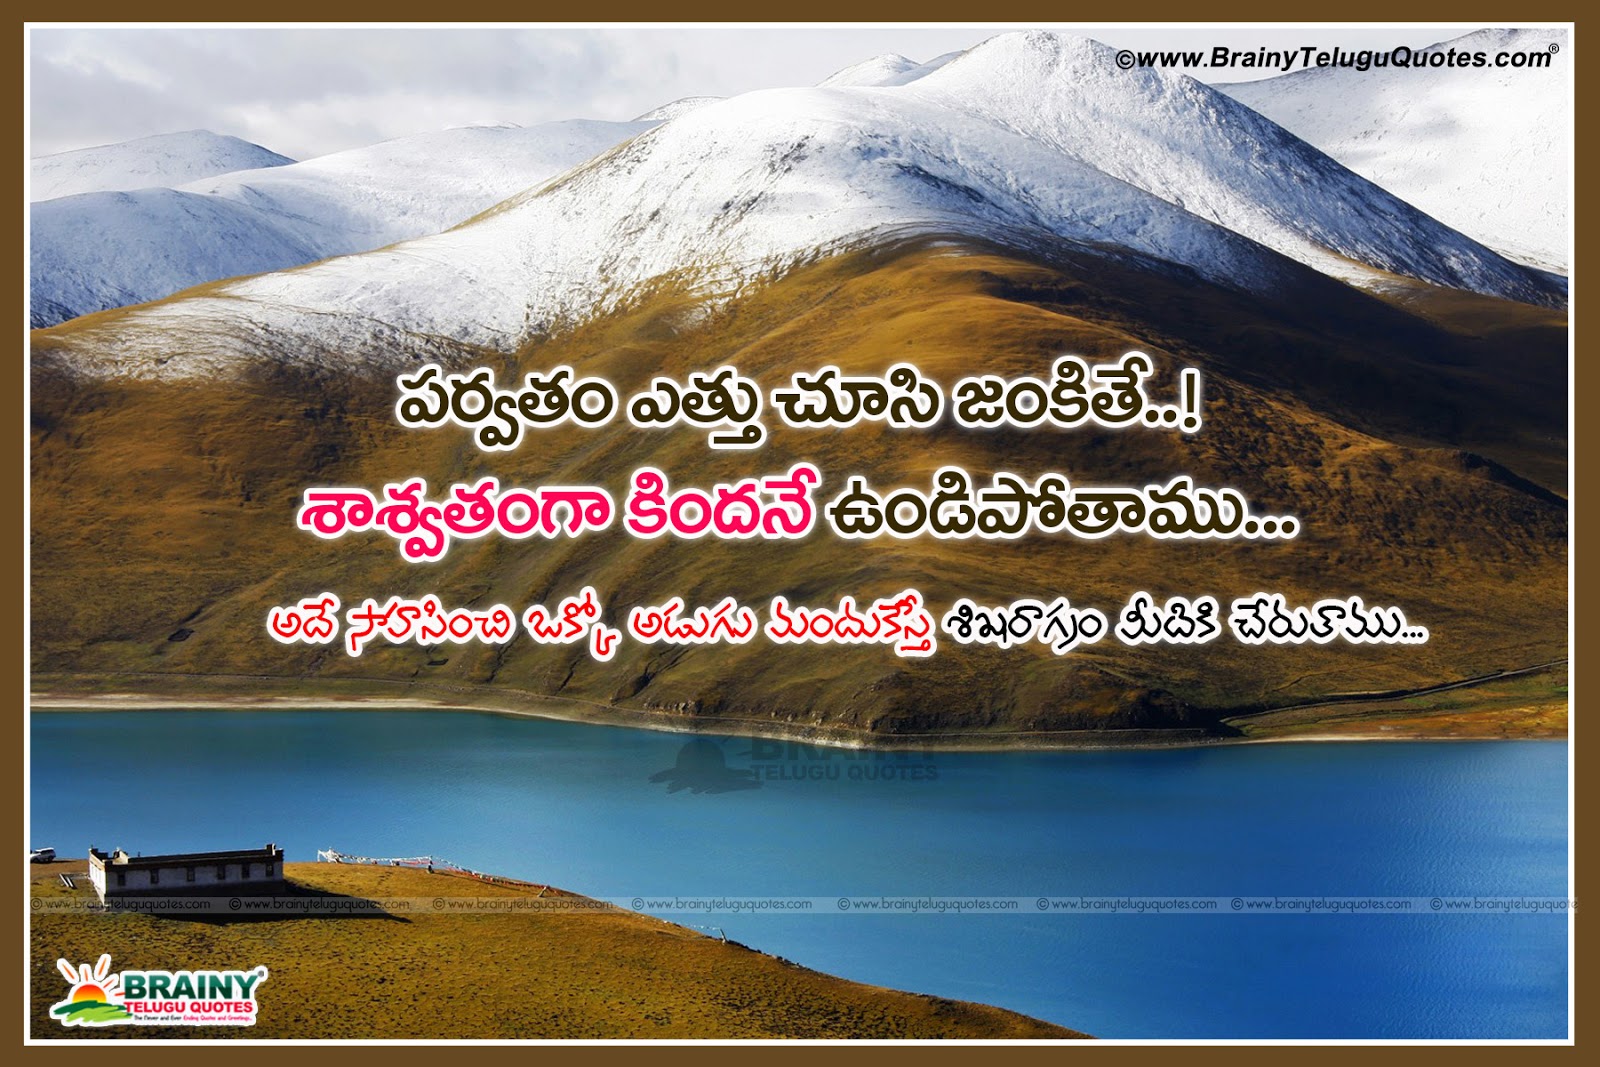 Inspirational Life Quotes in Telugu with Beautiful HD wallpapers ...